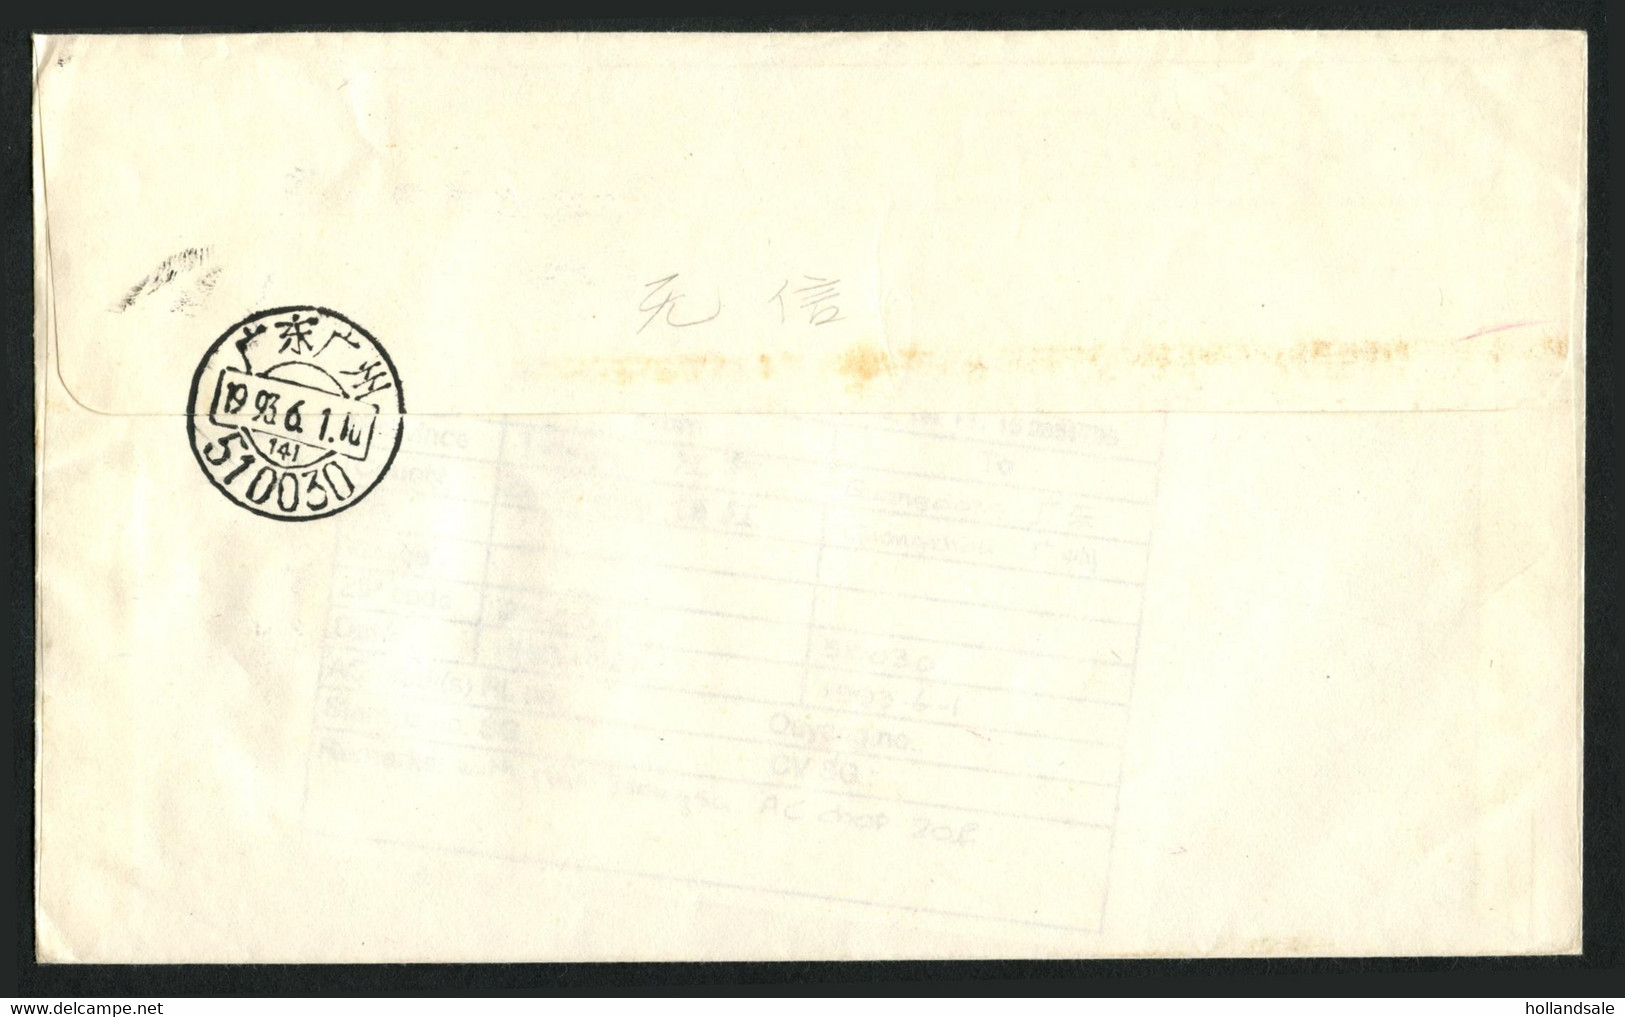 CHINA PRC ADDED CHARGE LABELS - 1993, May 27. R-cover From Zhenjiang To Shanghai. Red Frmes 20f AC-chop. - Portomarken